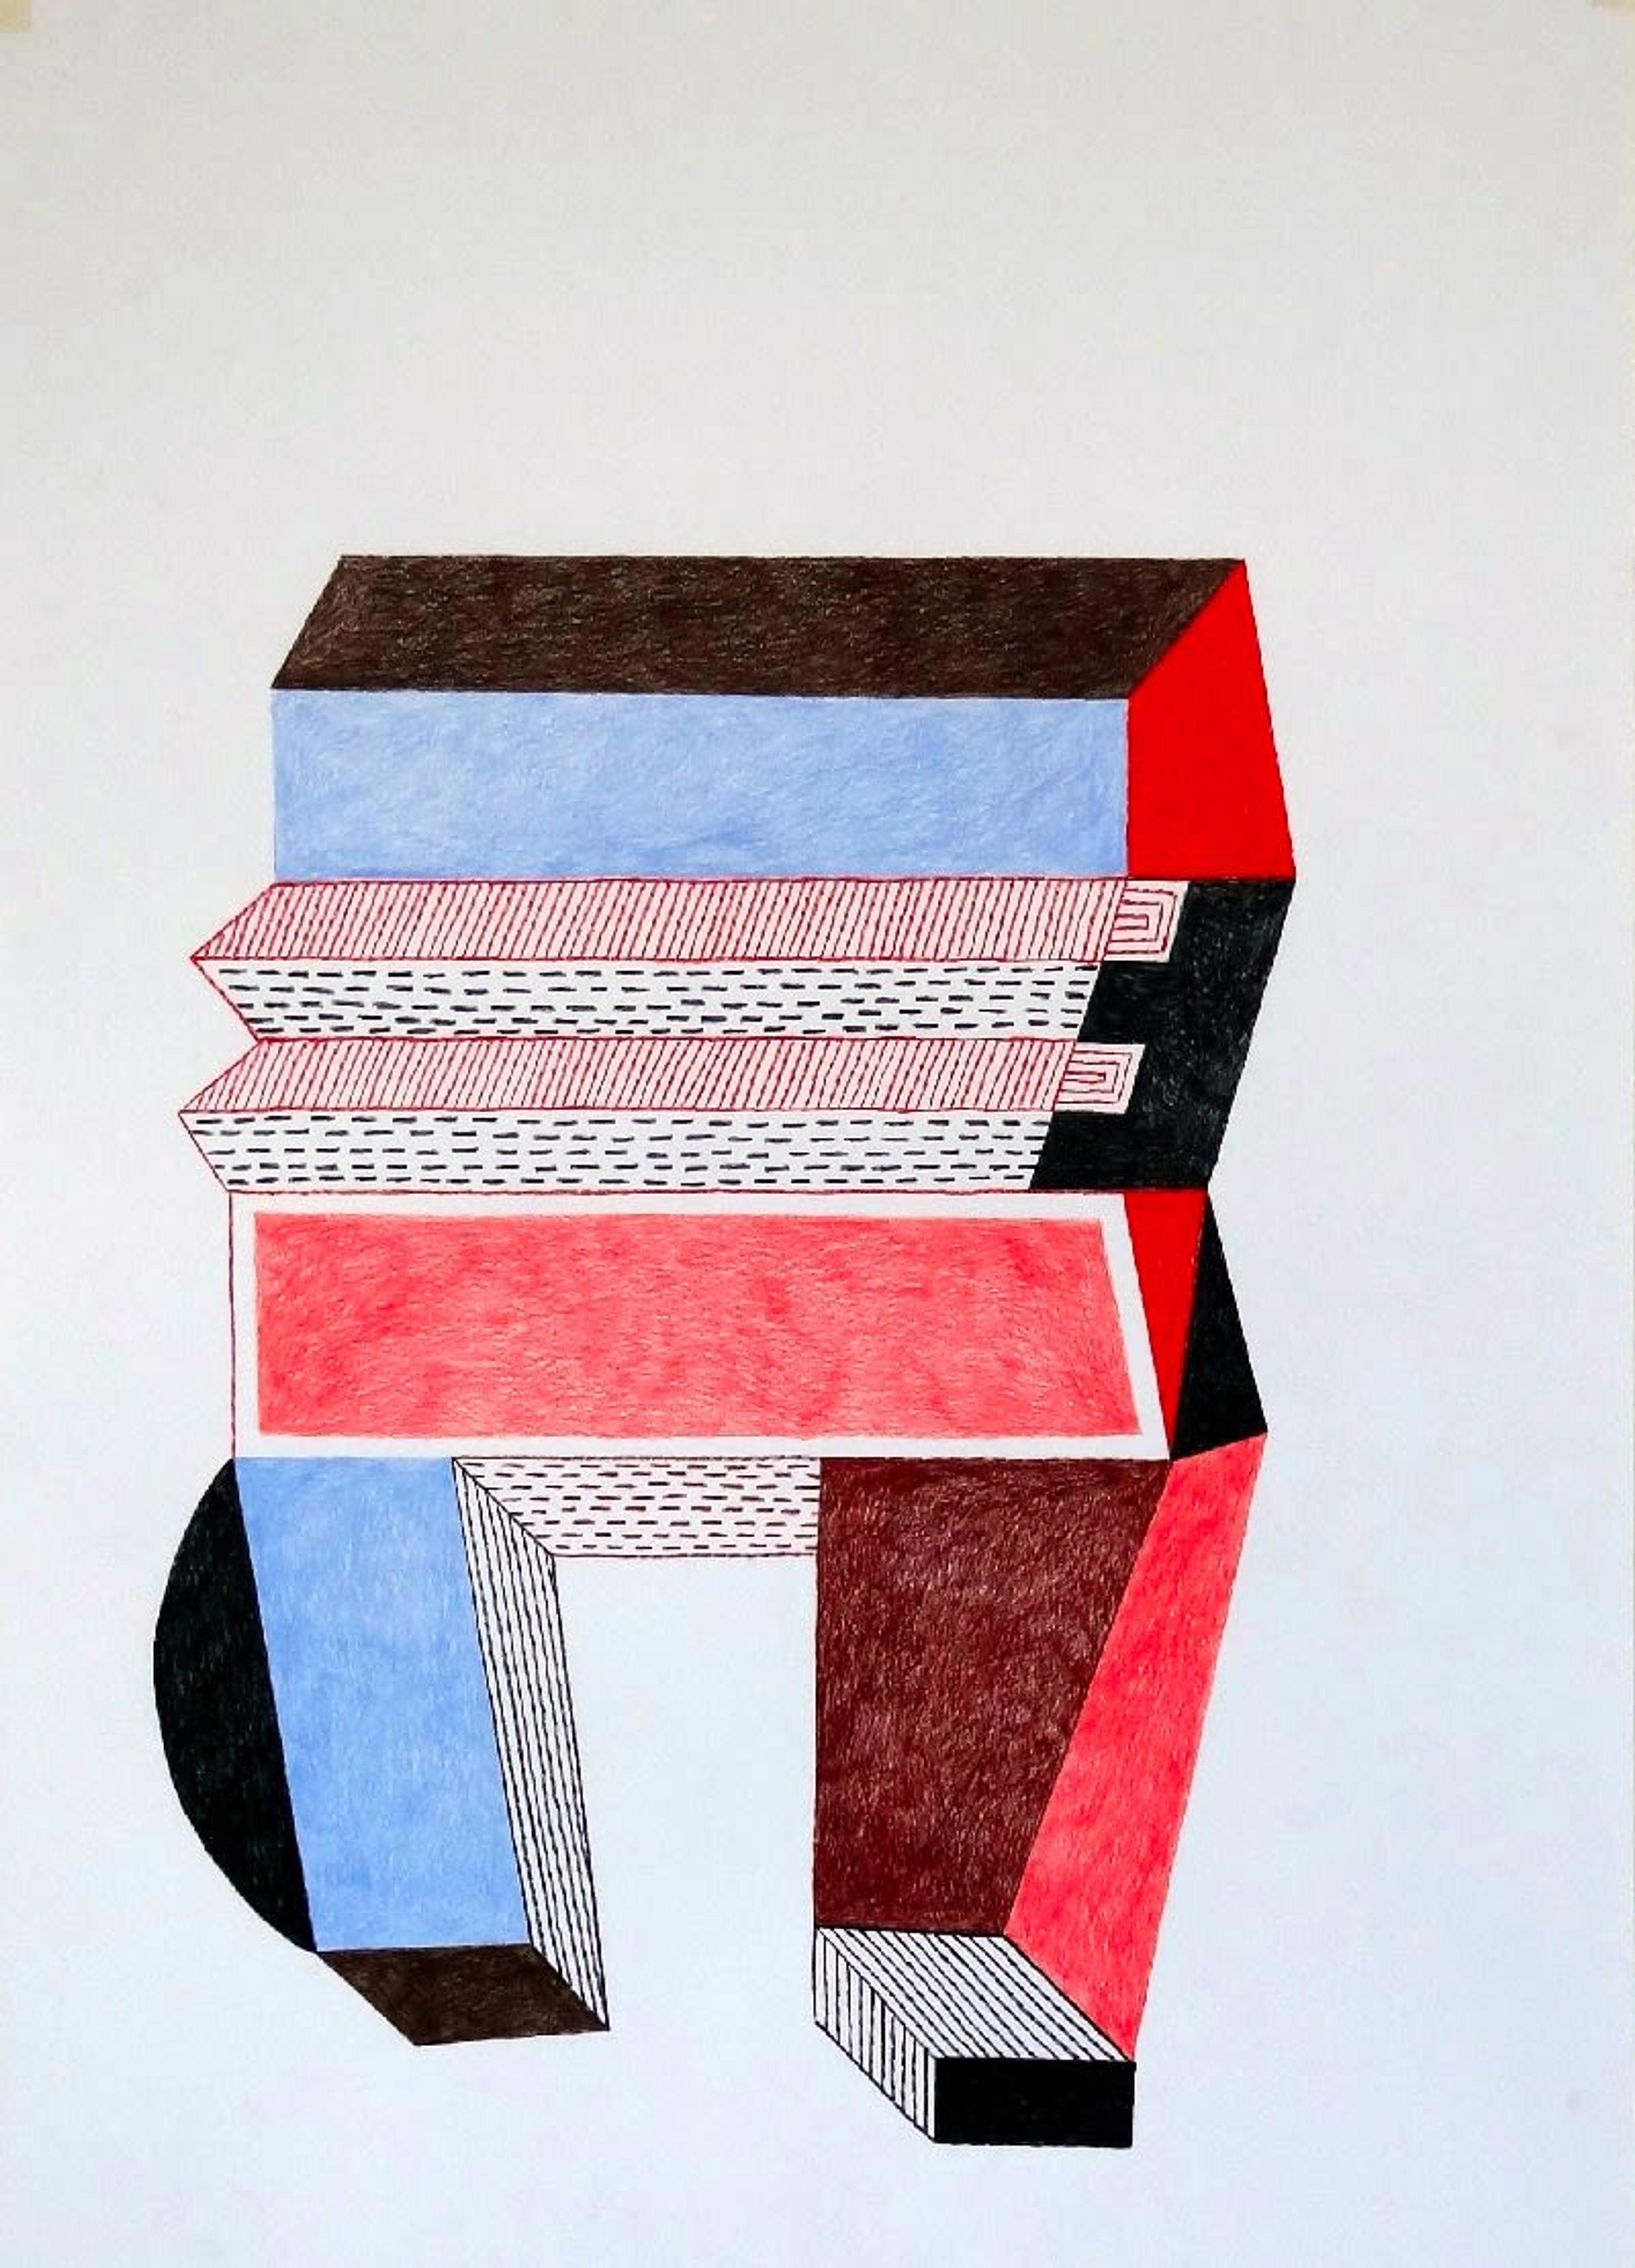 Big 8, by Nathalie Du Pasquier, drawing 2014, 70x100